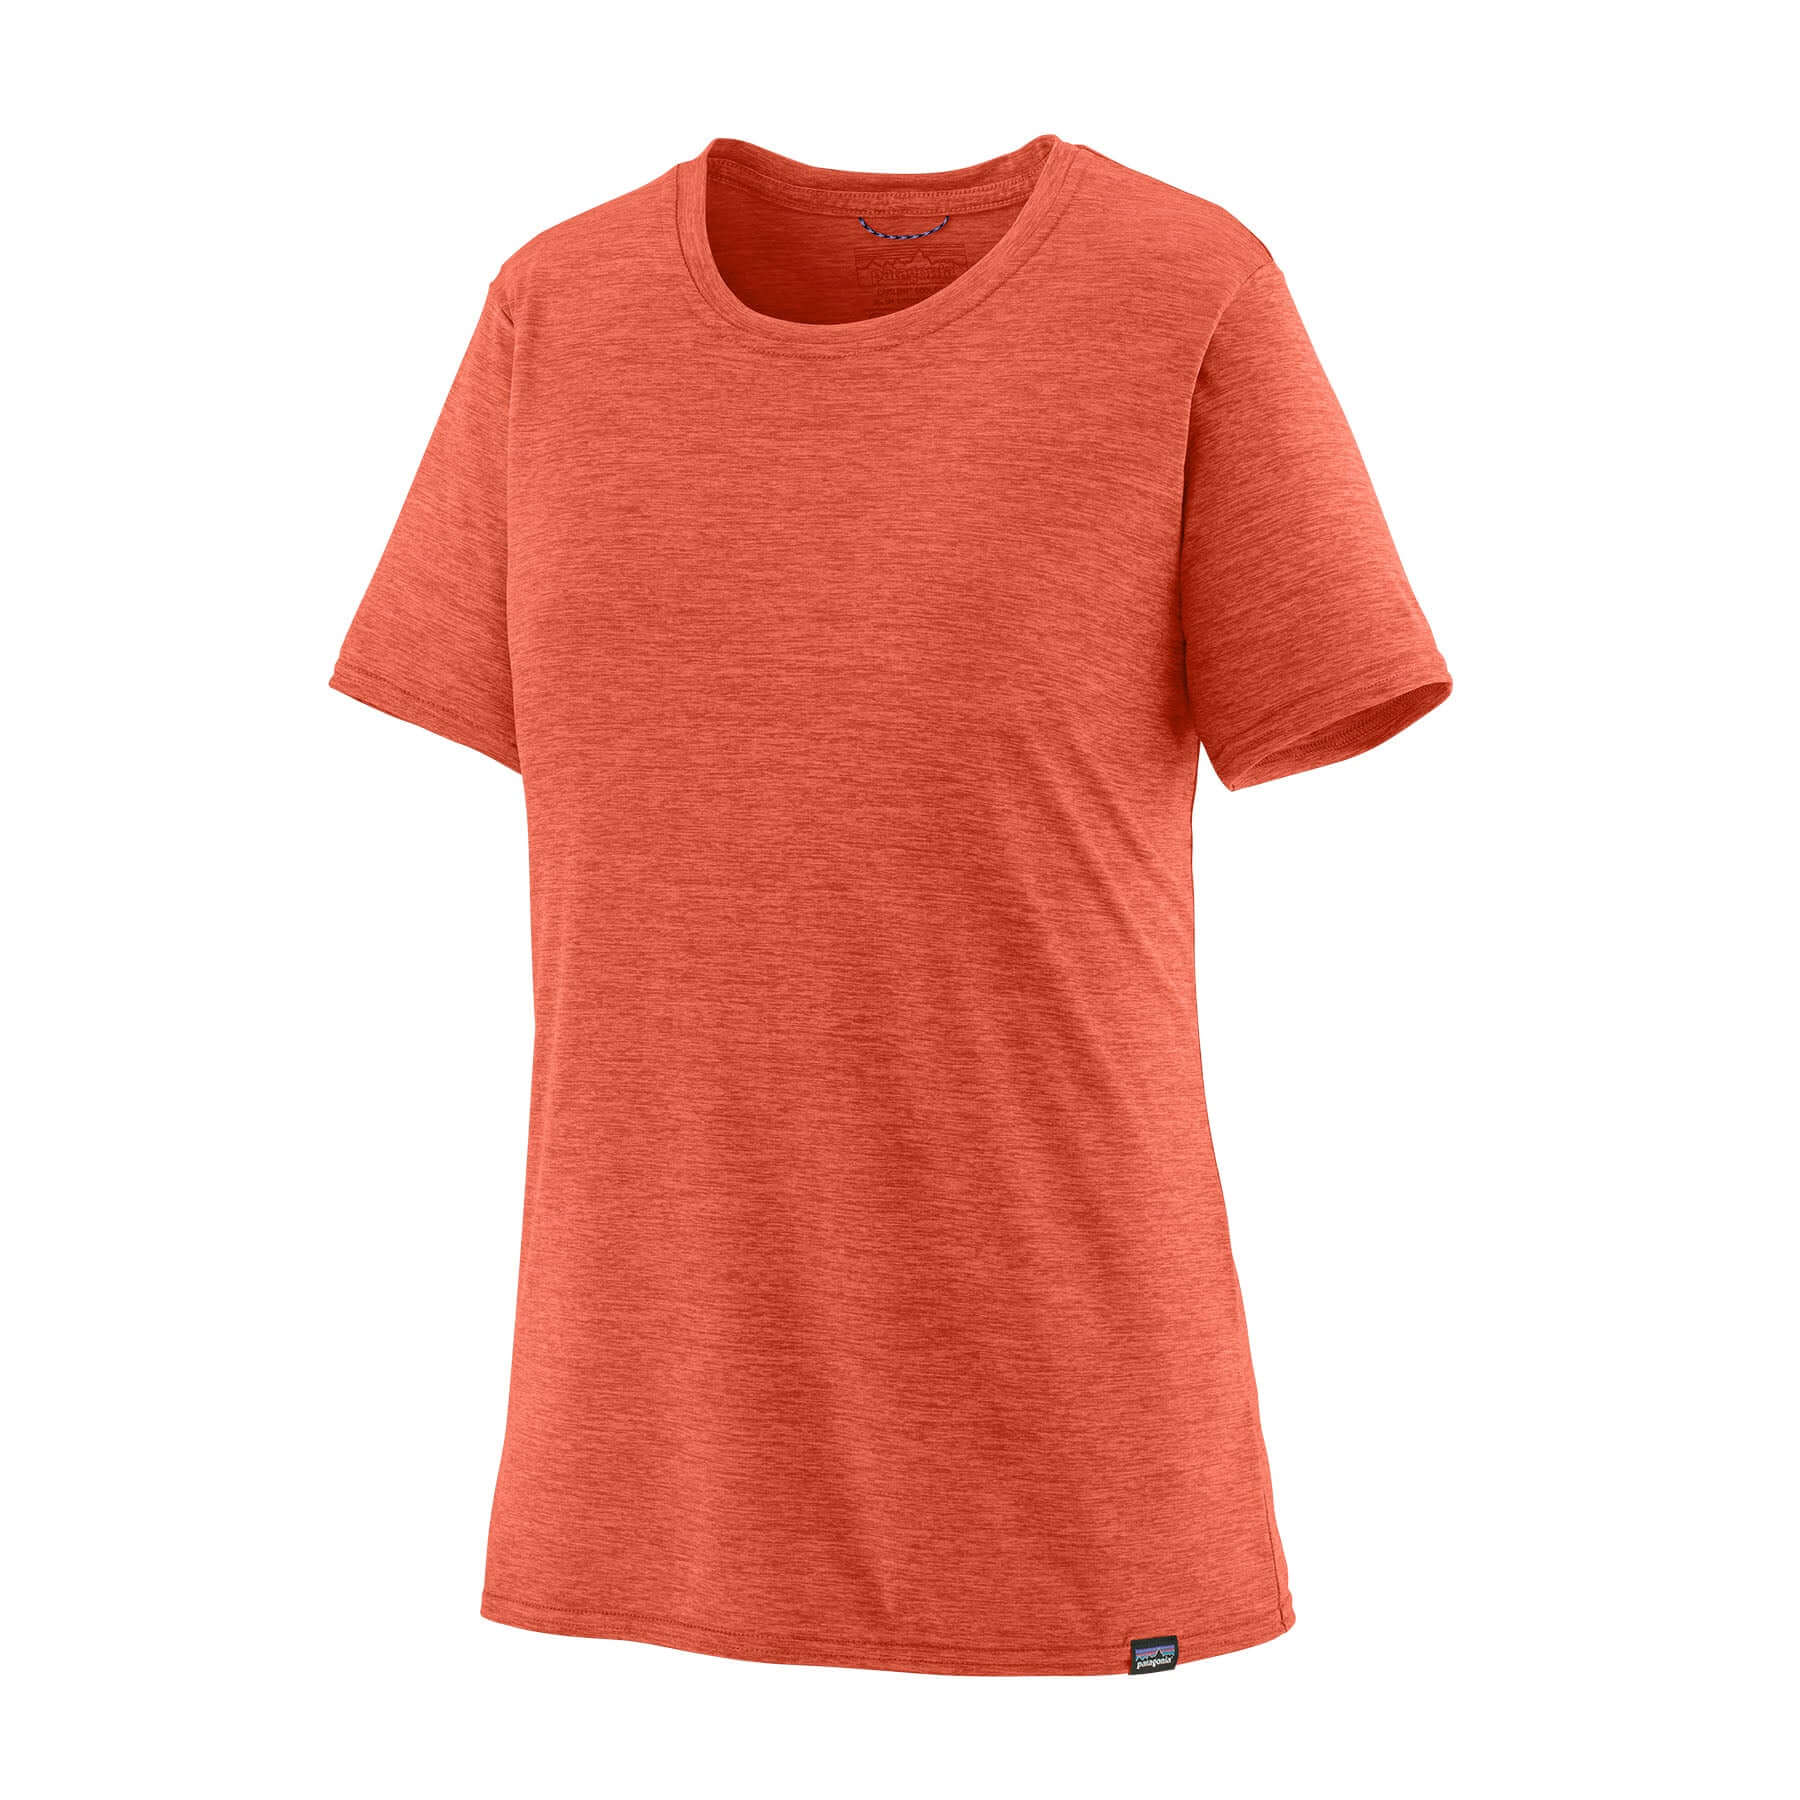 Women's Capilene® Cool Daily Shirt in Pimento Red - Coho Coral X - Dye | Patagonia Bend